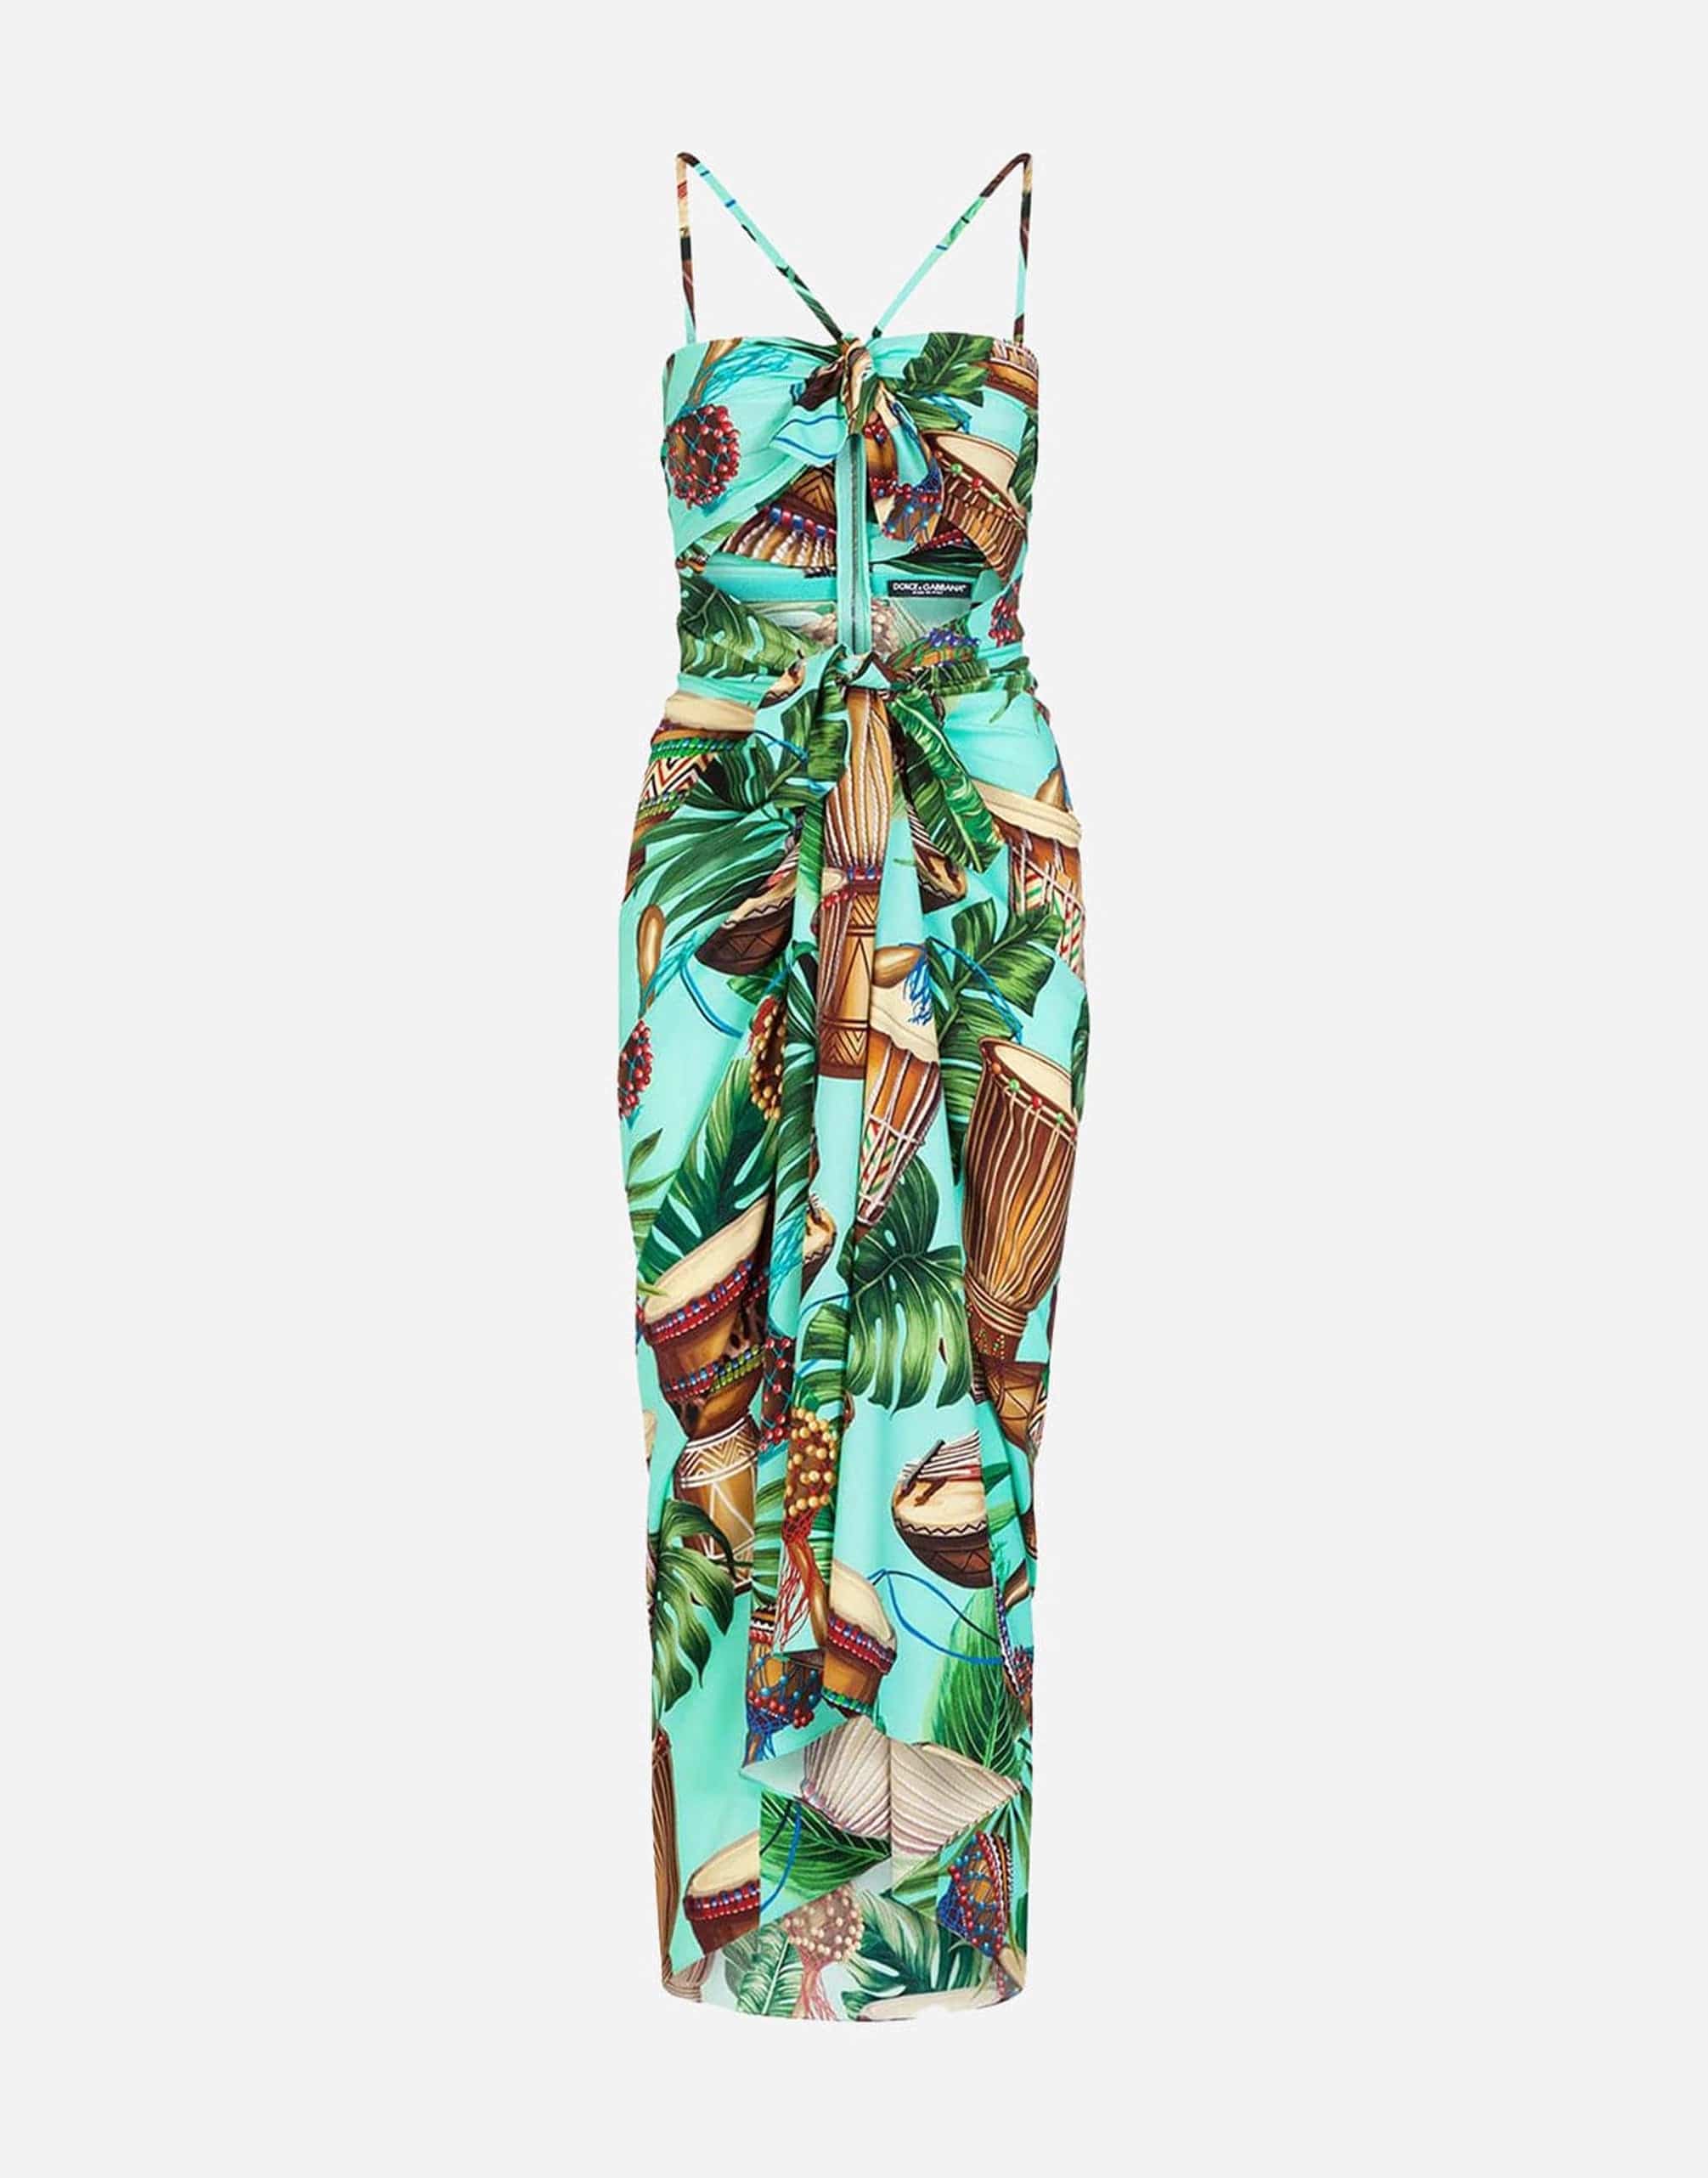 Dolce & Gabbana Tropical Print Fitted Dress